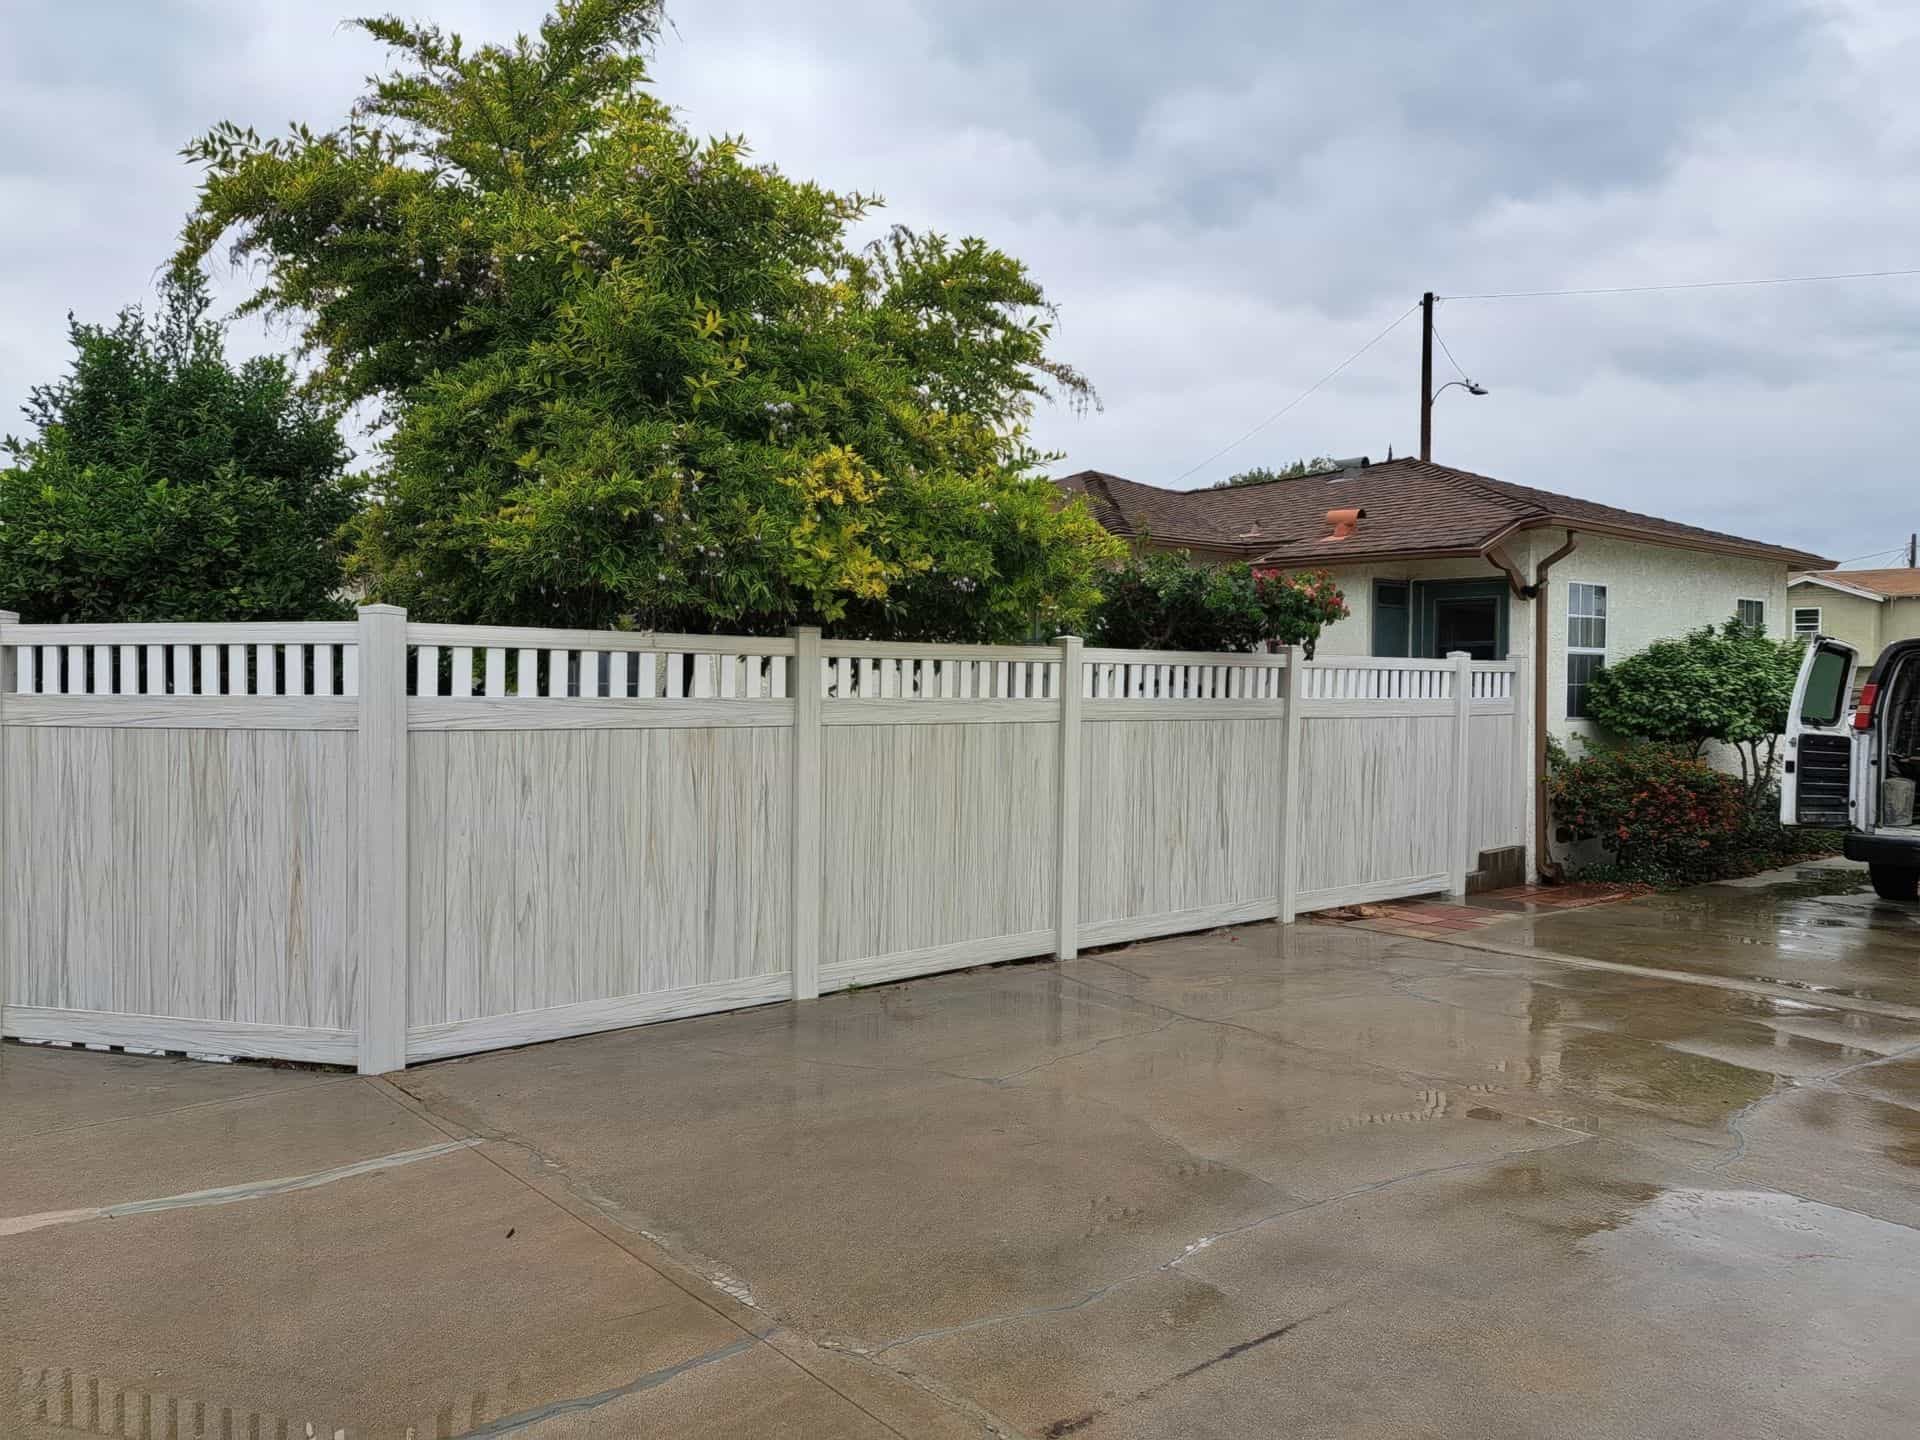 Vinyl privacy fence separating traditional suburban house garden with trees from driveway of another suburban house